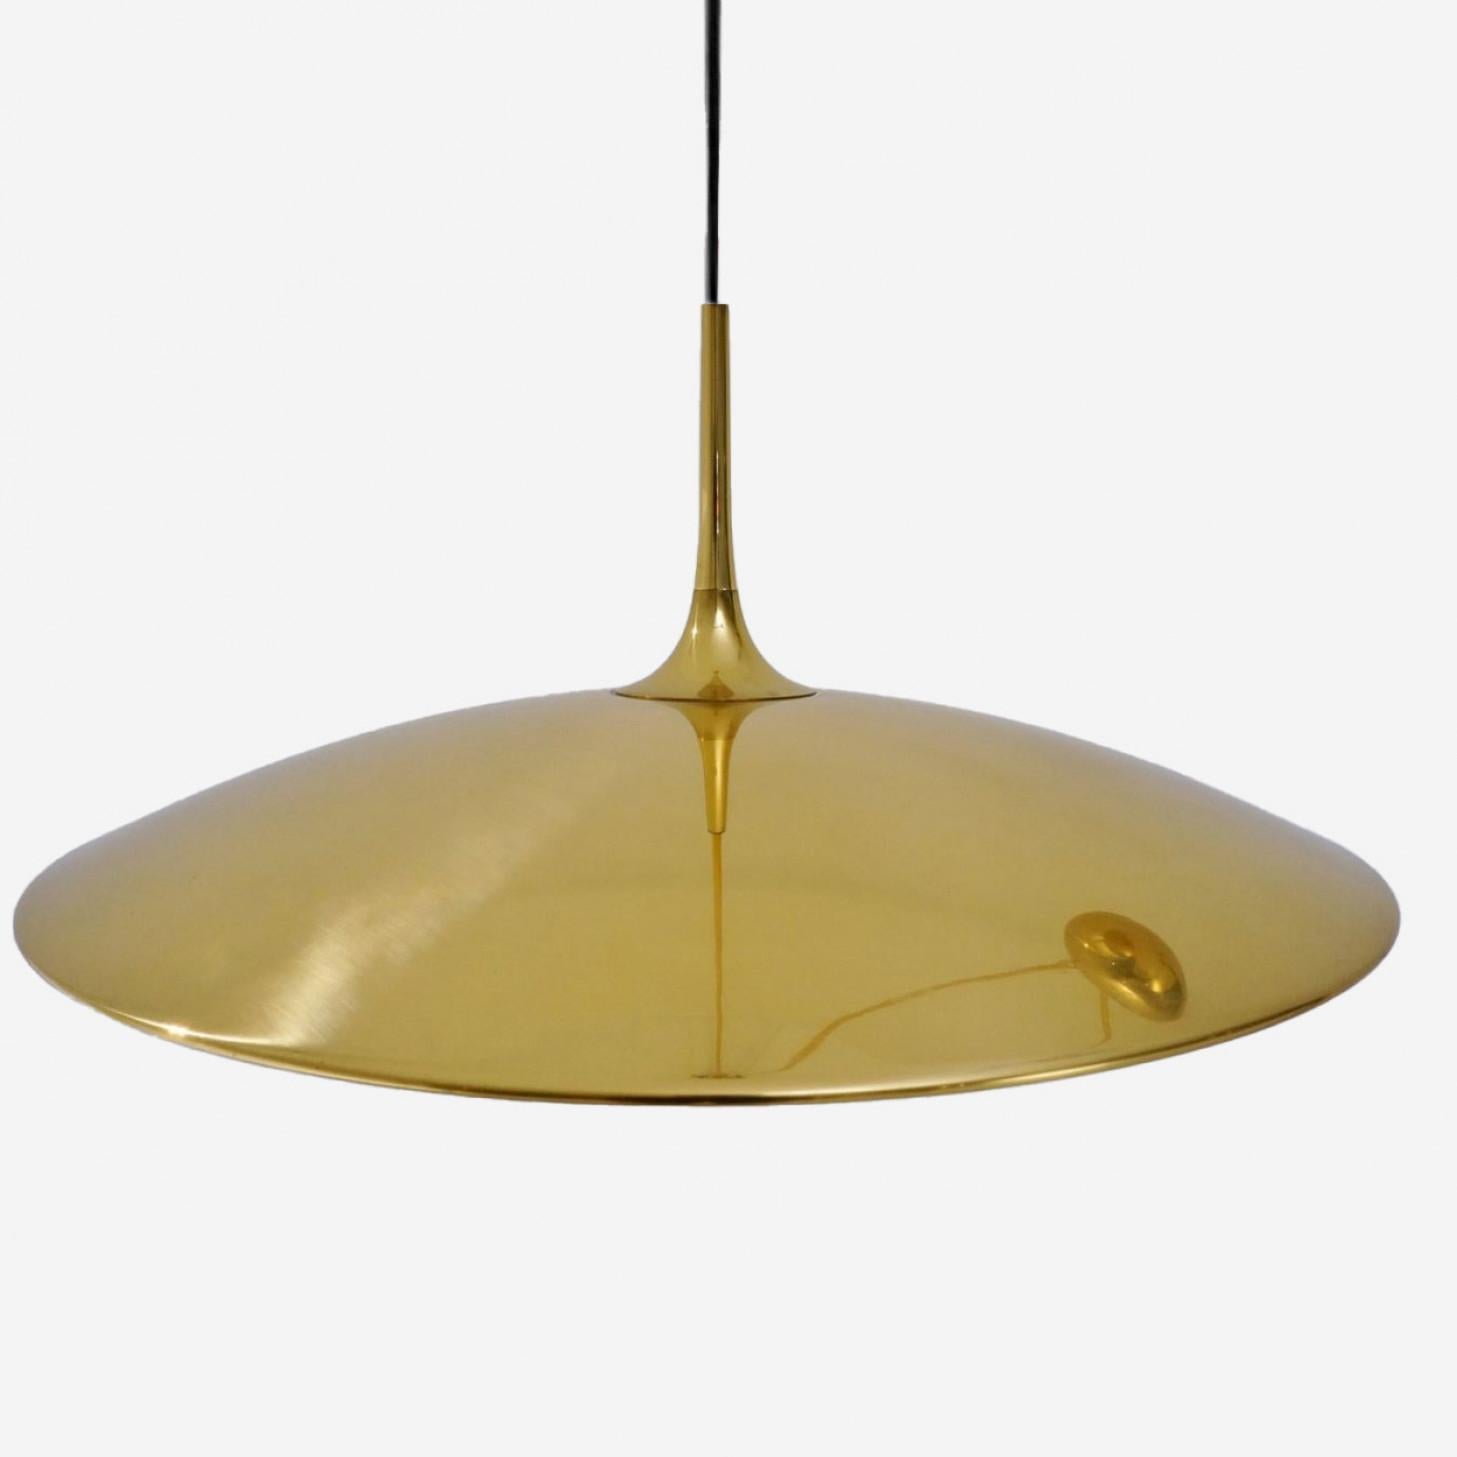 Polished Onos Fixture With Side Counter Weights by Florian Schulz For Sale